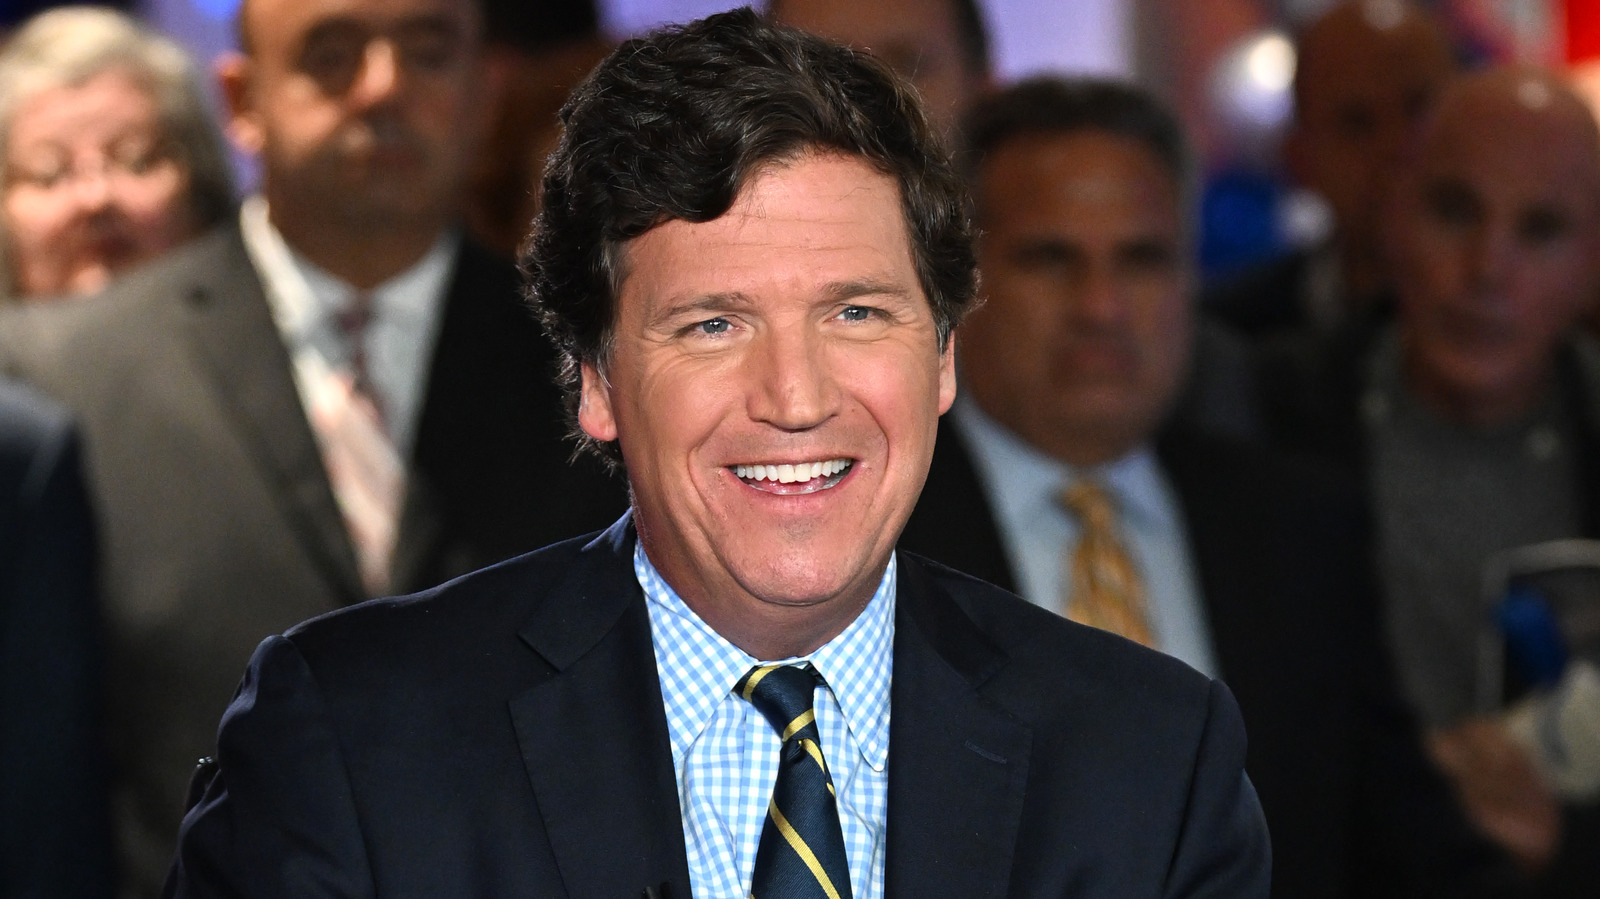 Tucker Carlson Almost Had A Wildly Different Career Before Fox News